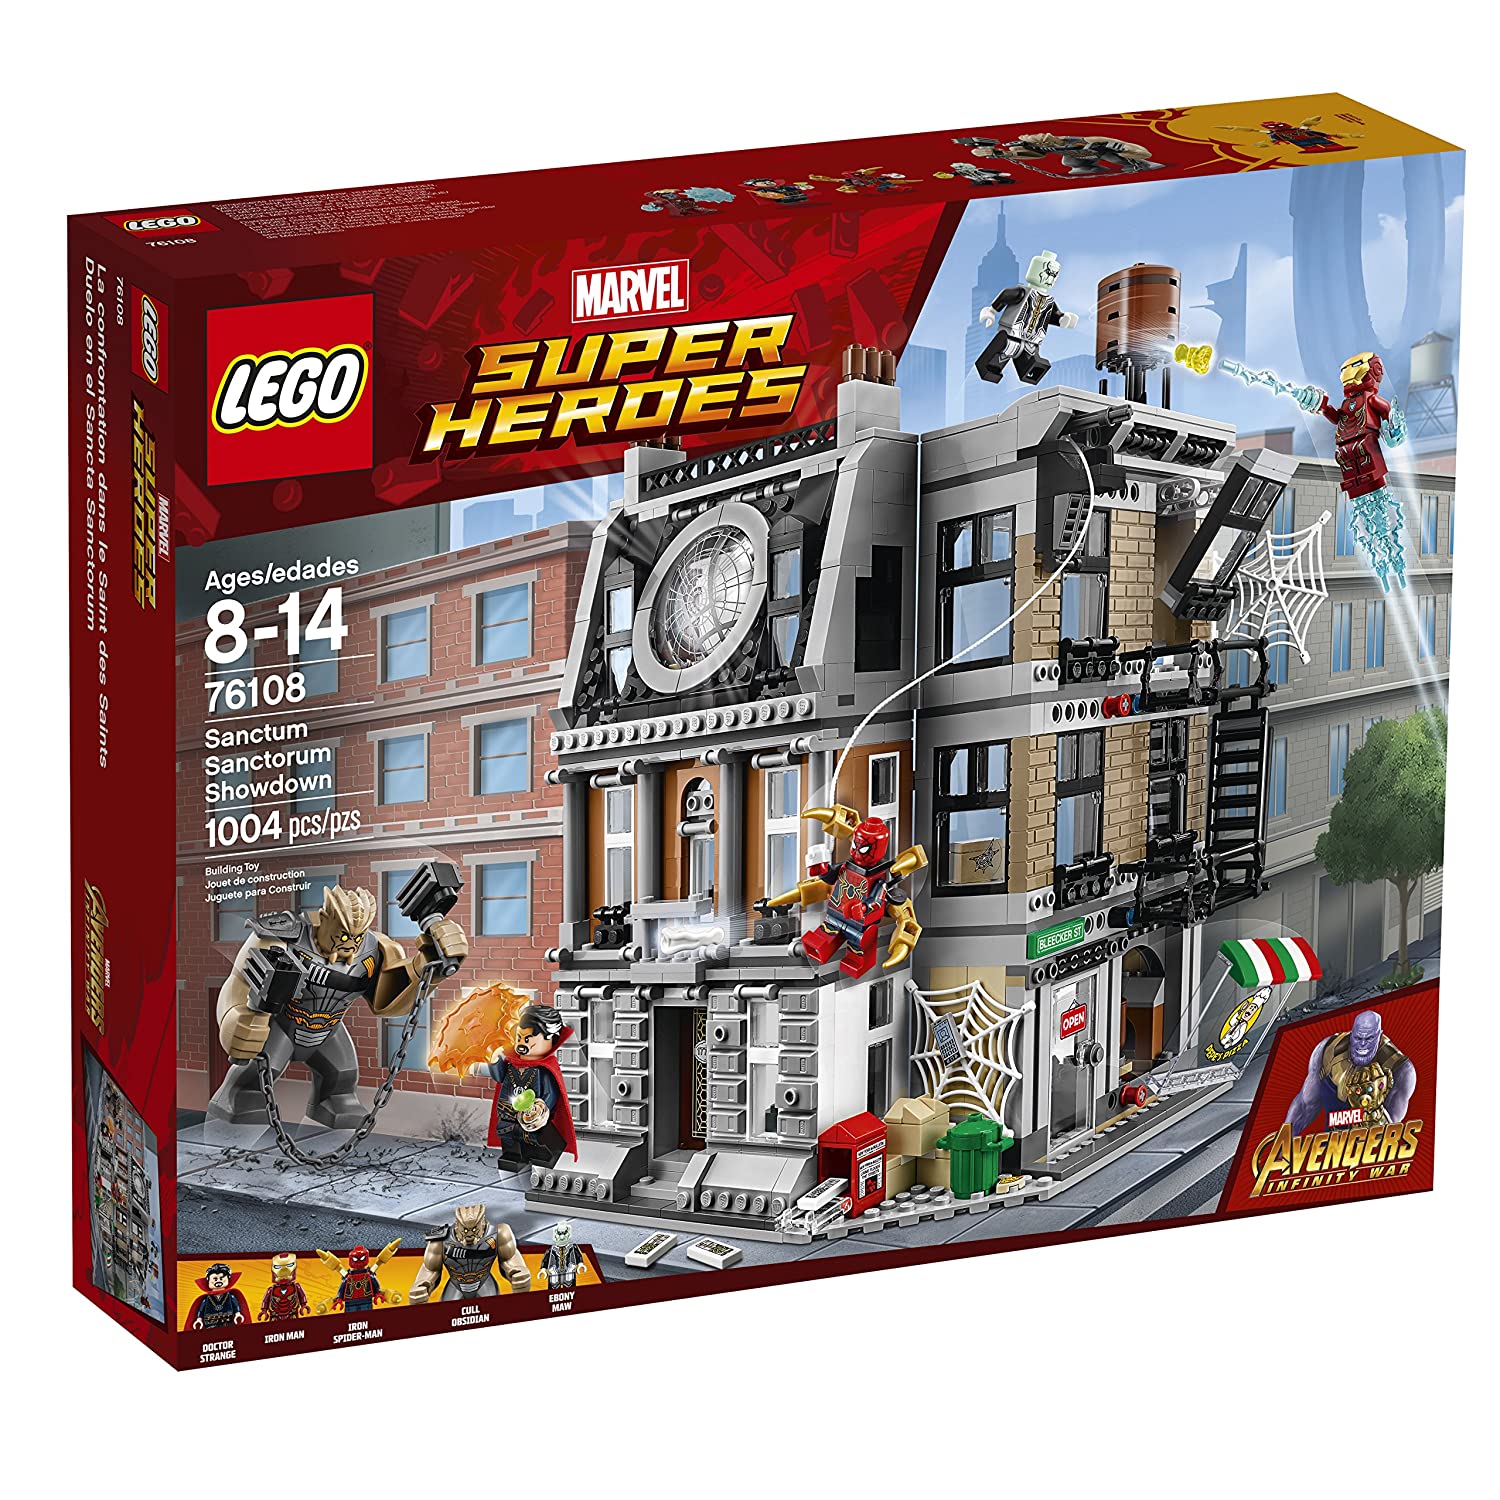 Top 9 Best LEGO Avengers Infinity War Sets Reviews in 2022 2